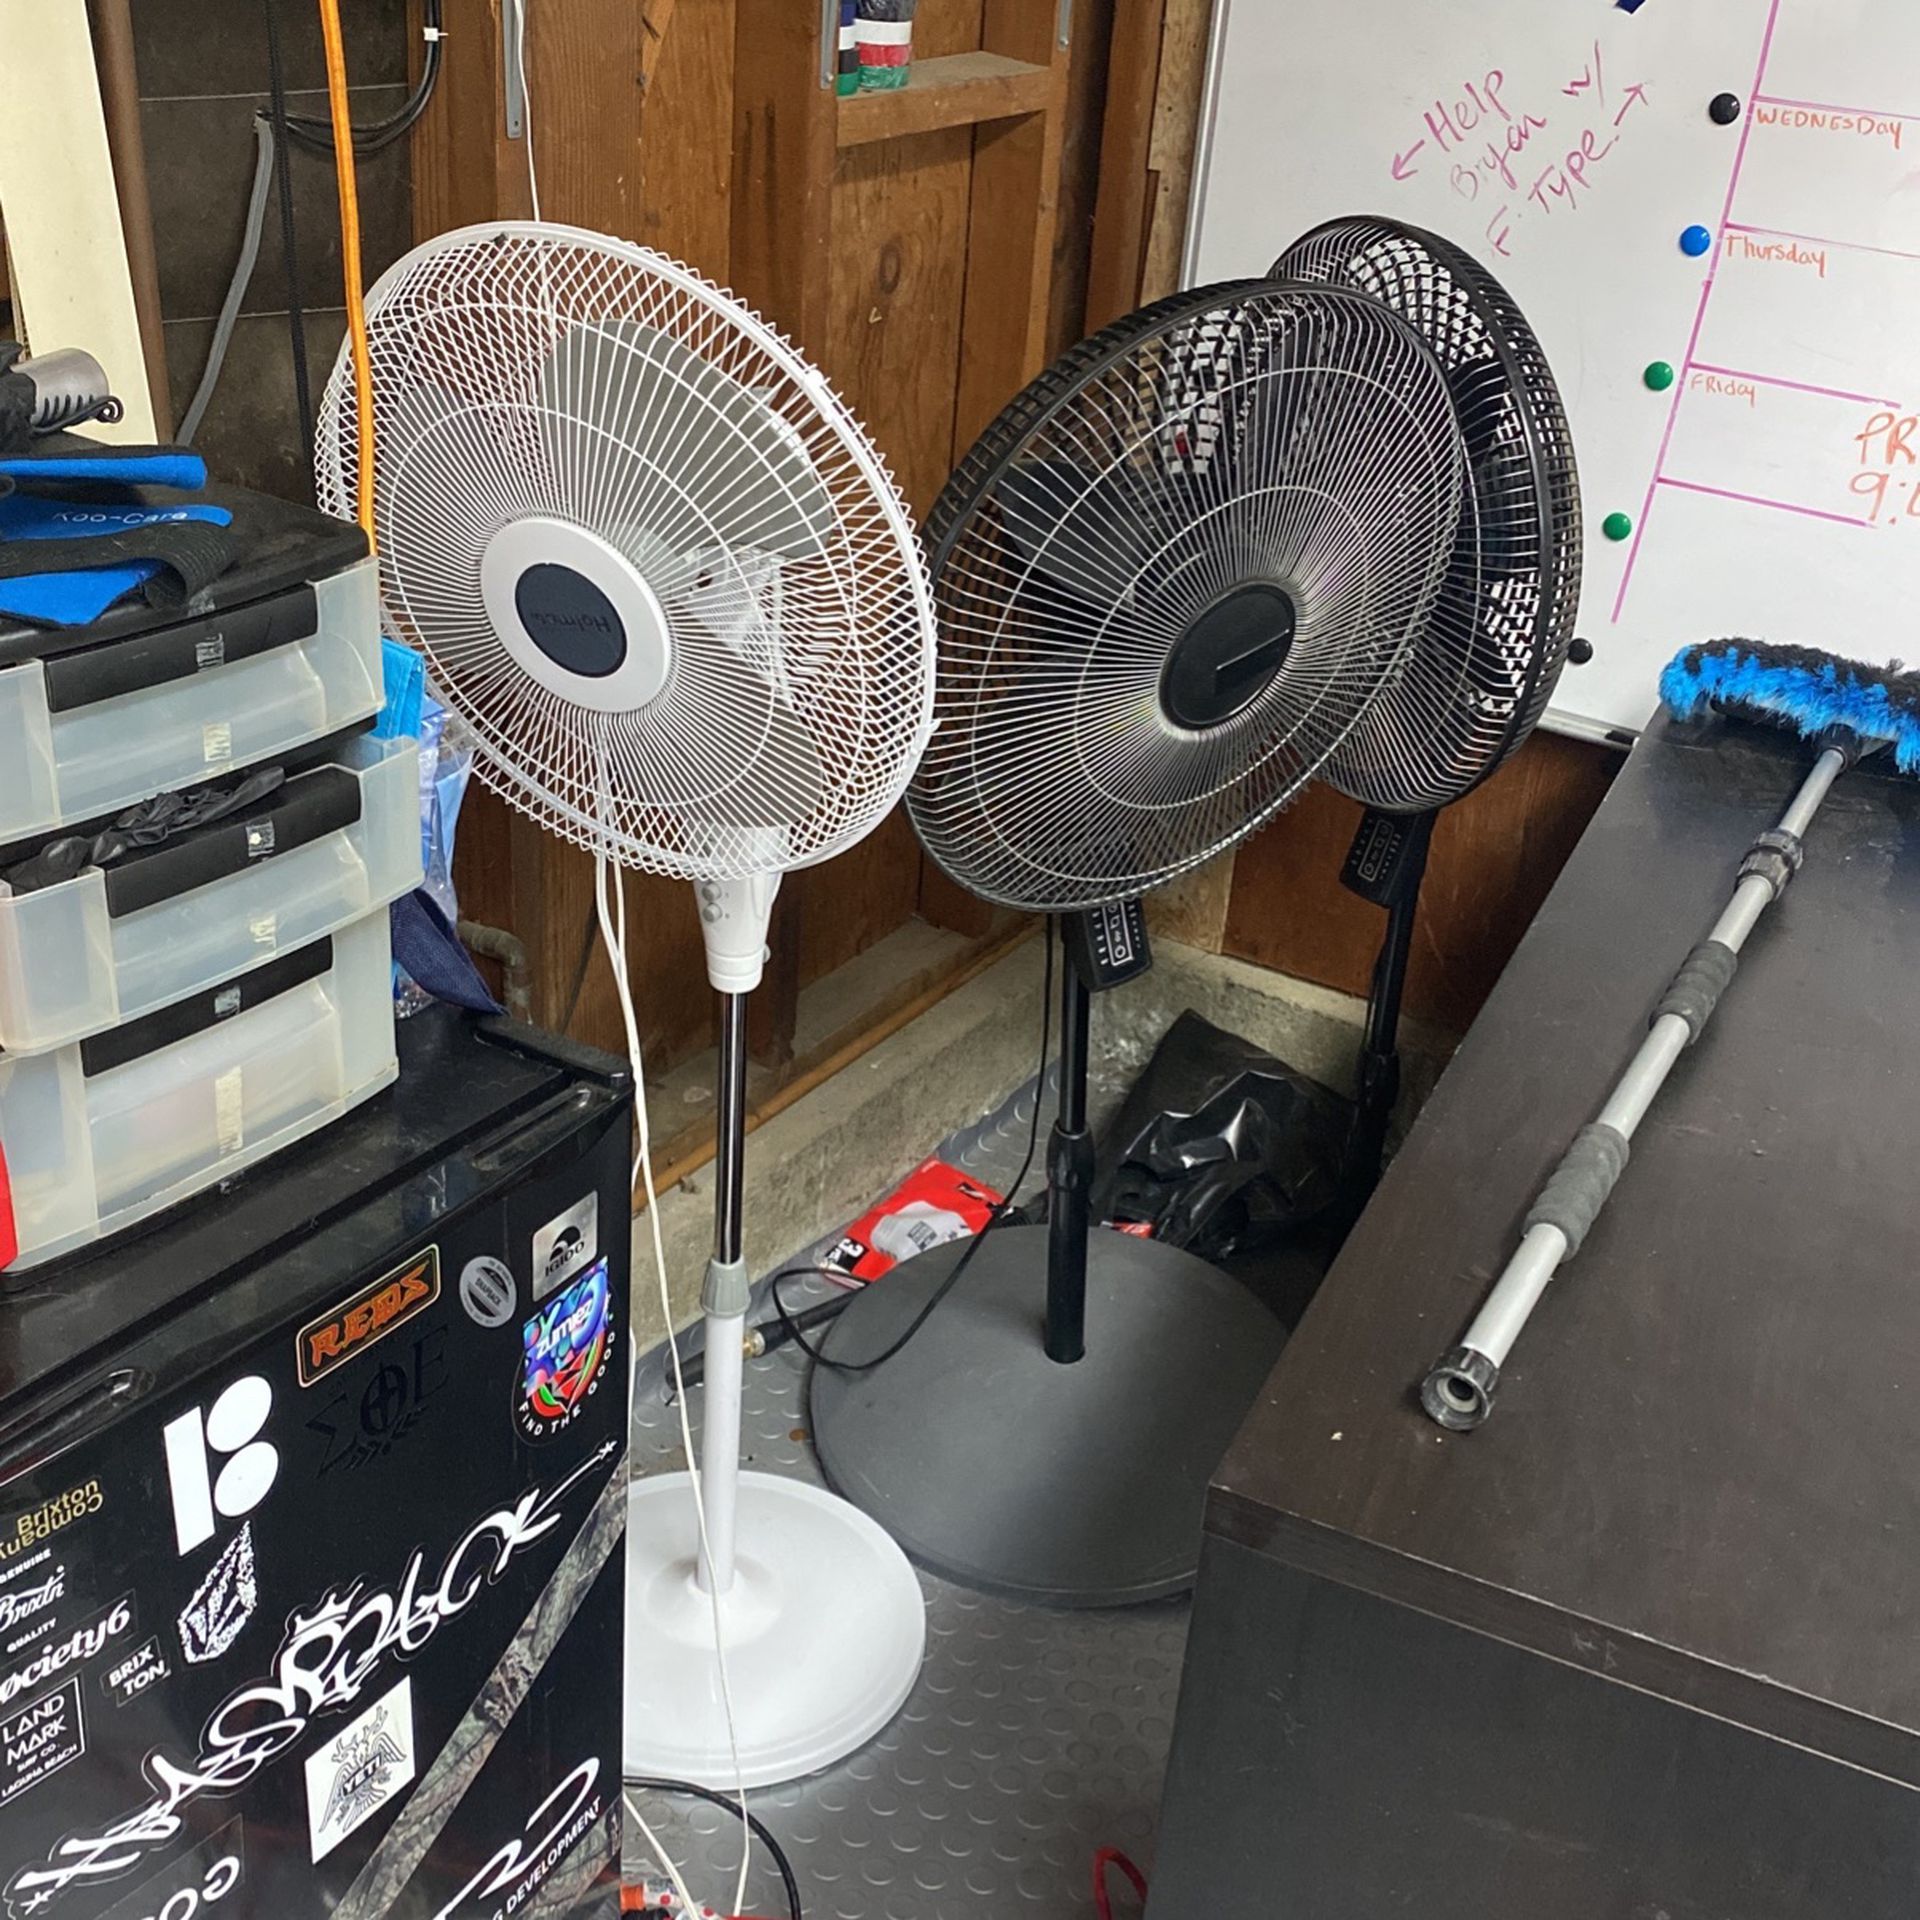 3 New Fans For Sale